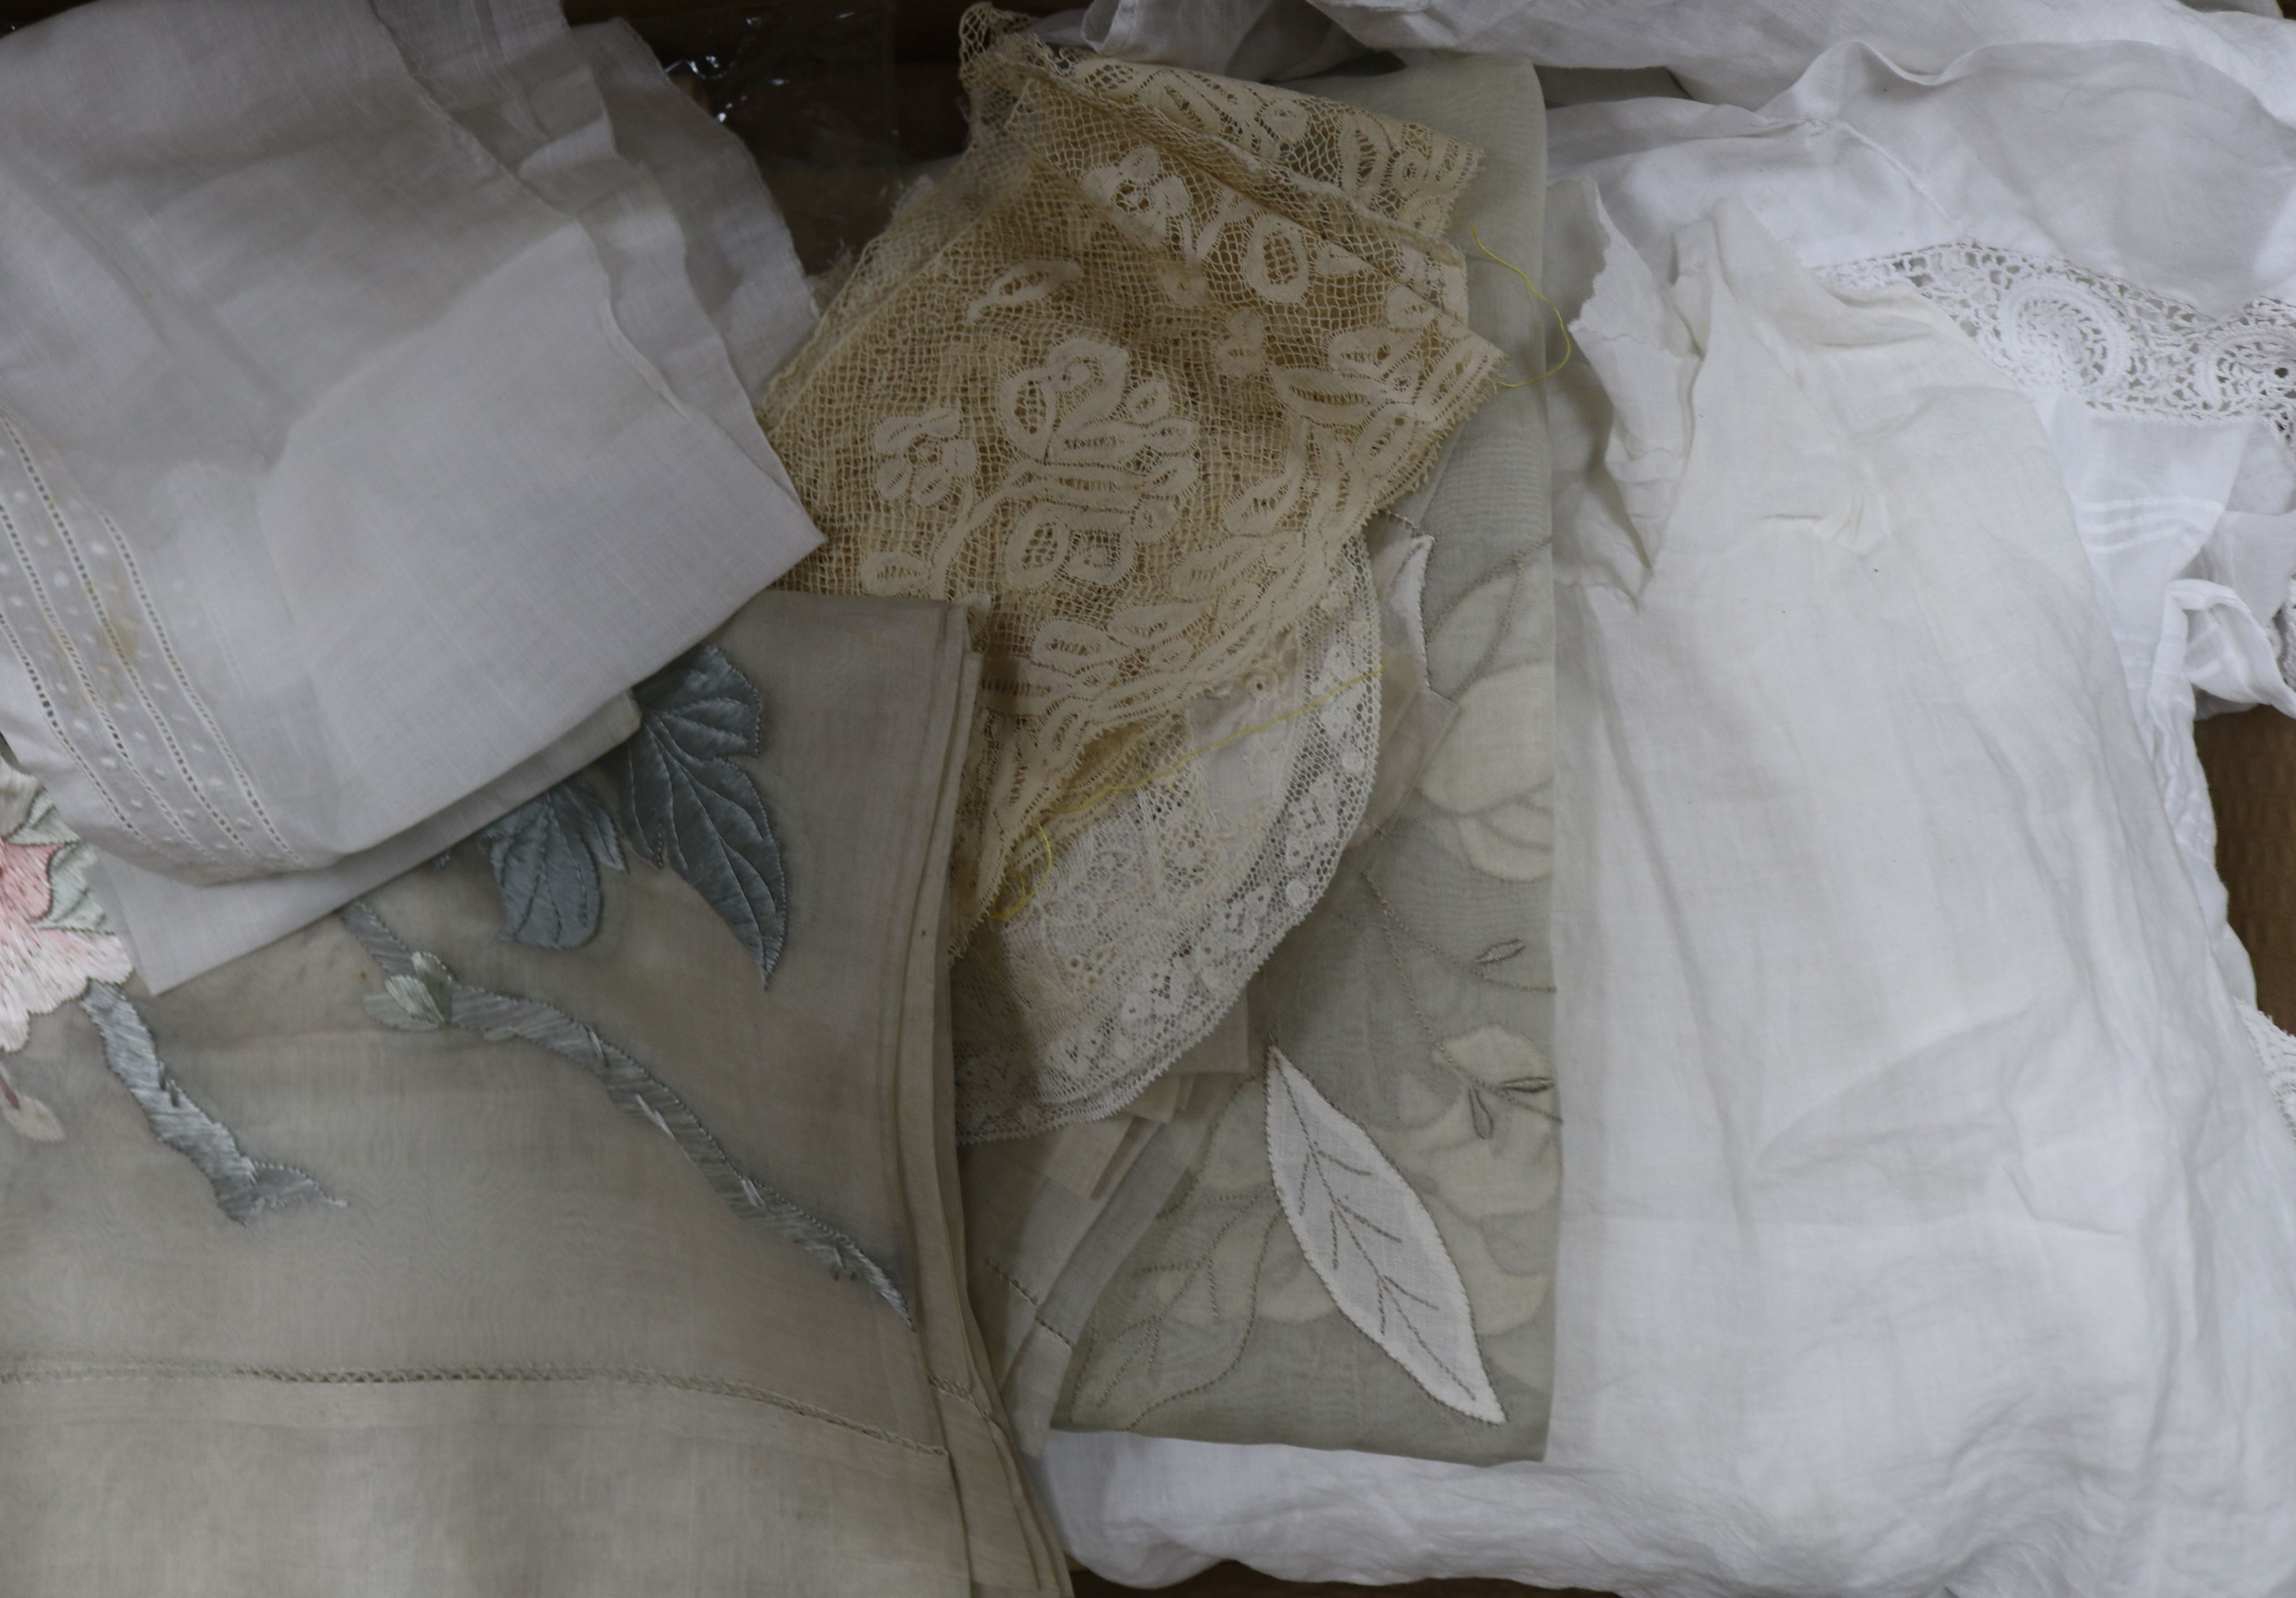 An Edwardian ladies blouse, camisole, mixed lace trimmings, mats etc.